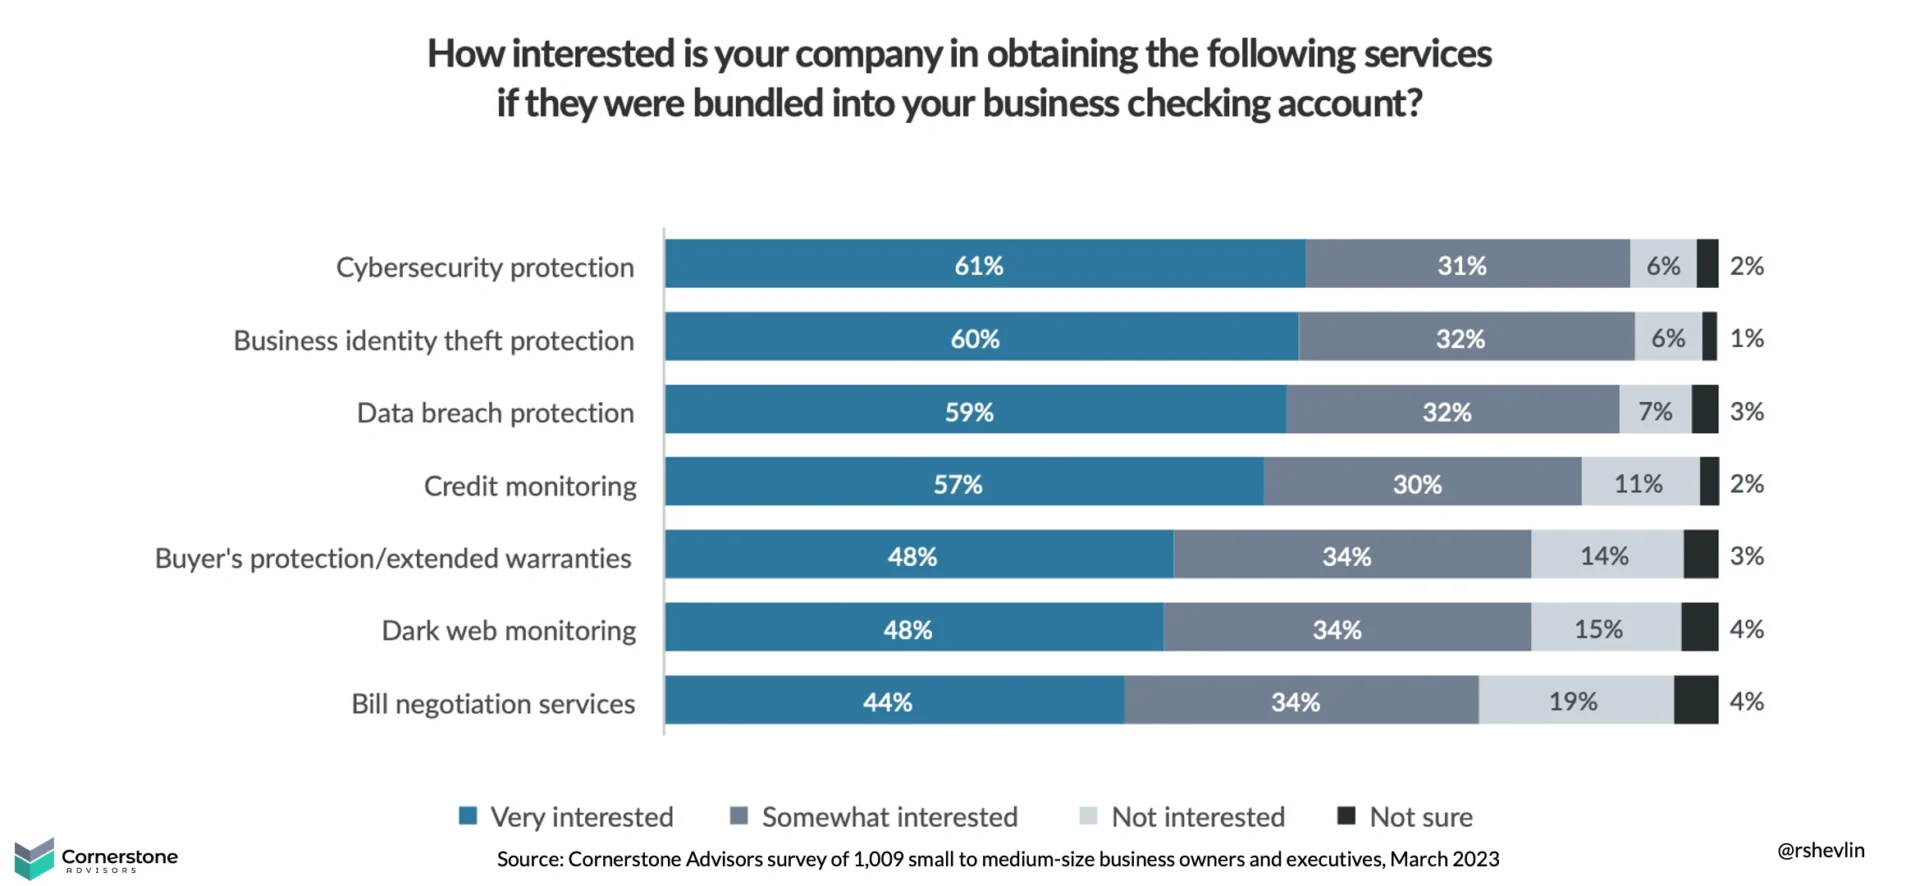 Small business interest in checking account features
SOURCE: ORNERSTONE ADVISORS